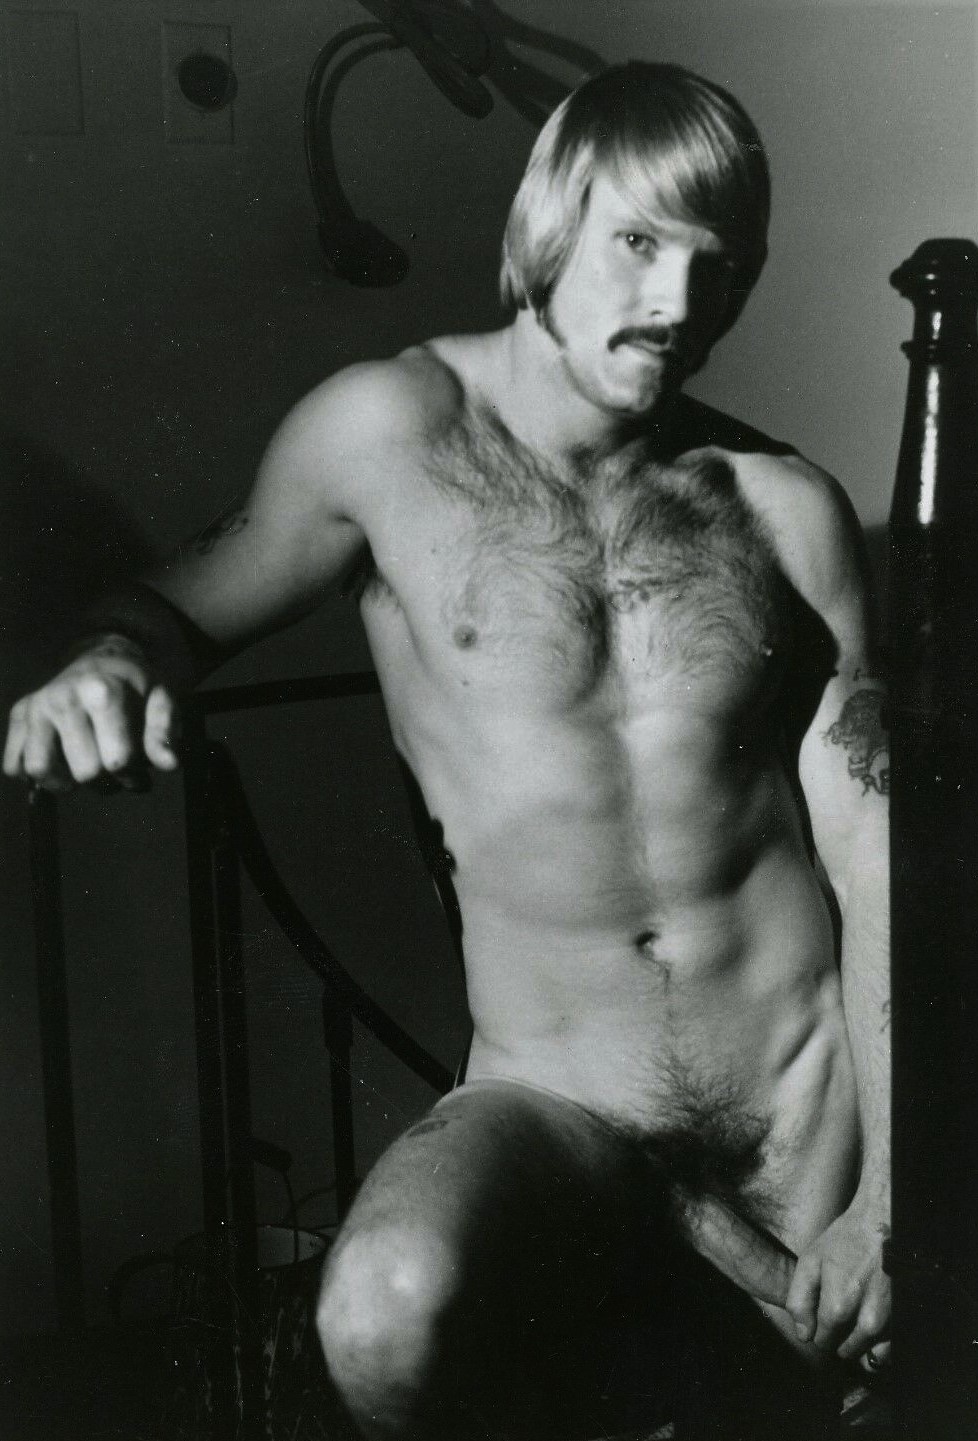 Barry hoffman gay porn star images